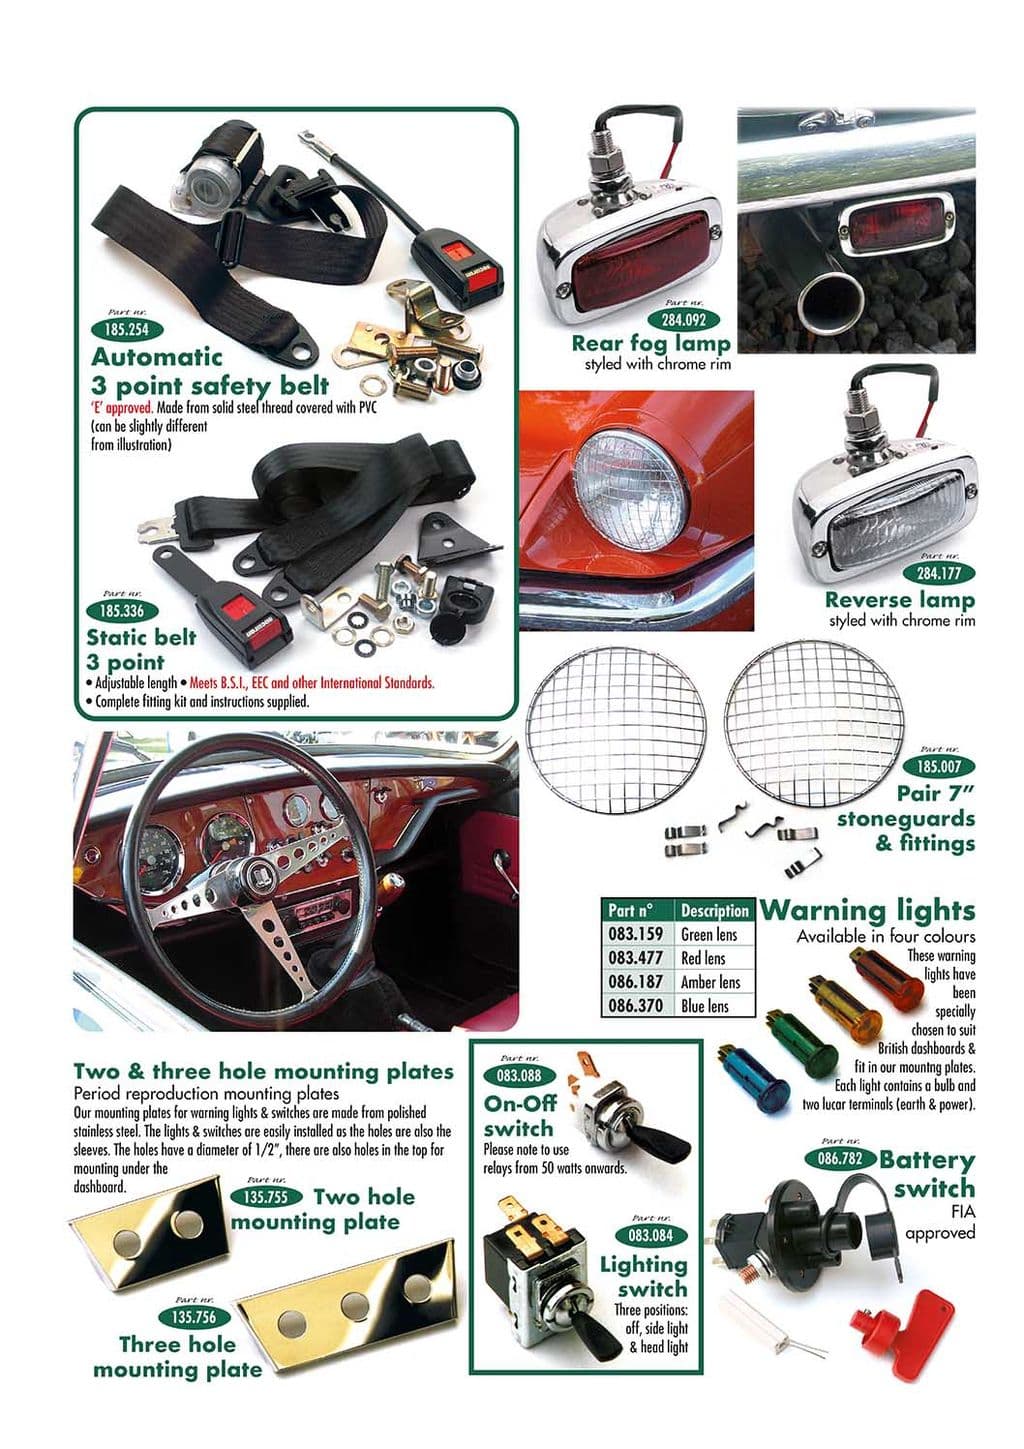 Safety parts & accessories - Safety parts - Maintenance & storage - MGTC 1945-1949 - Safety parts & accessories - 1